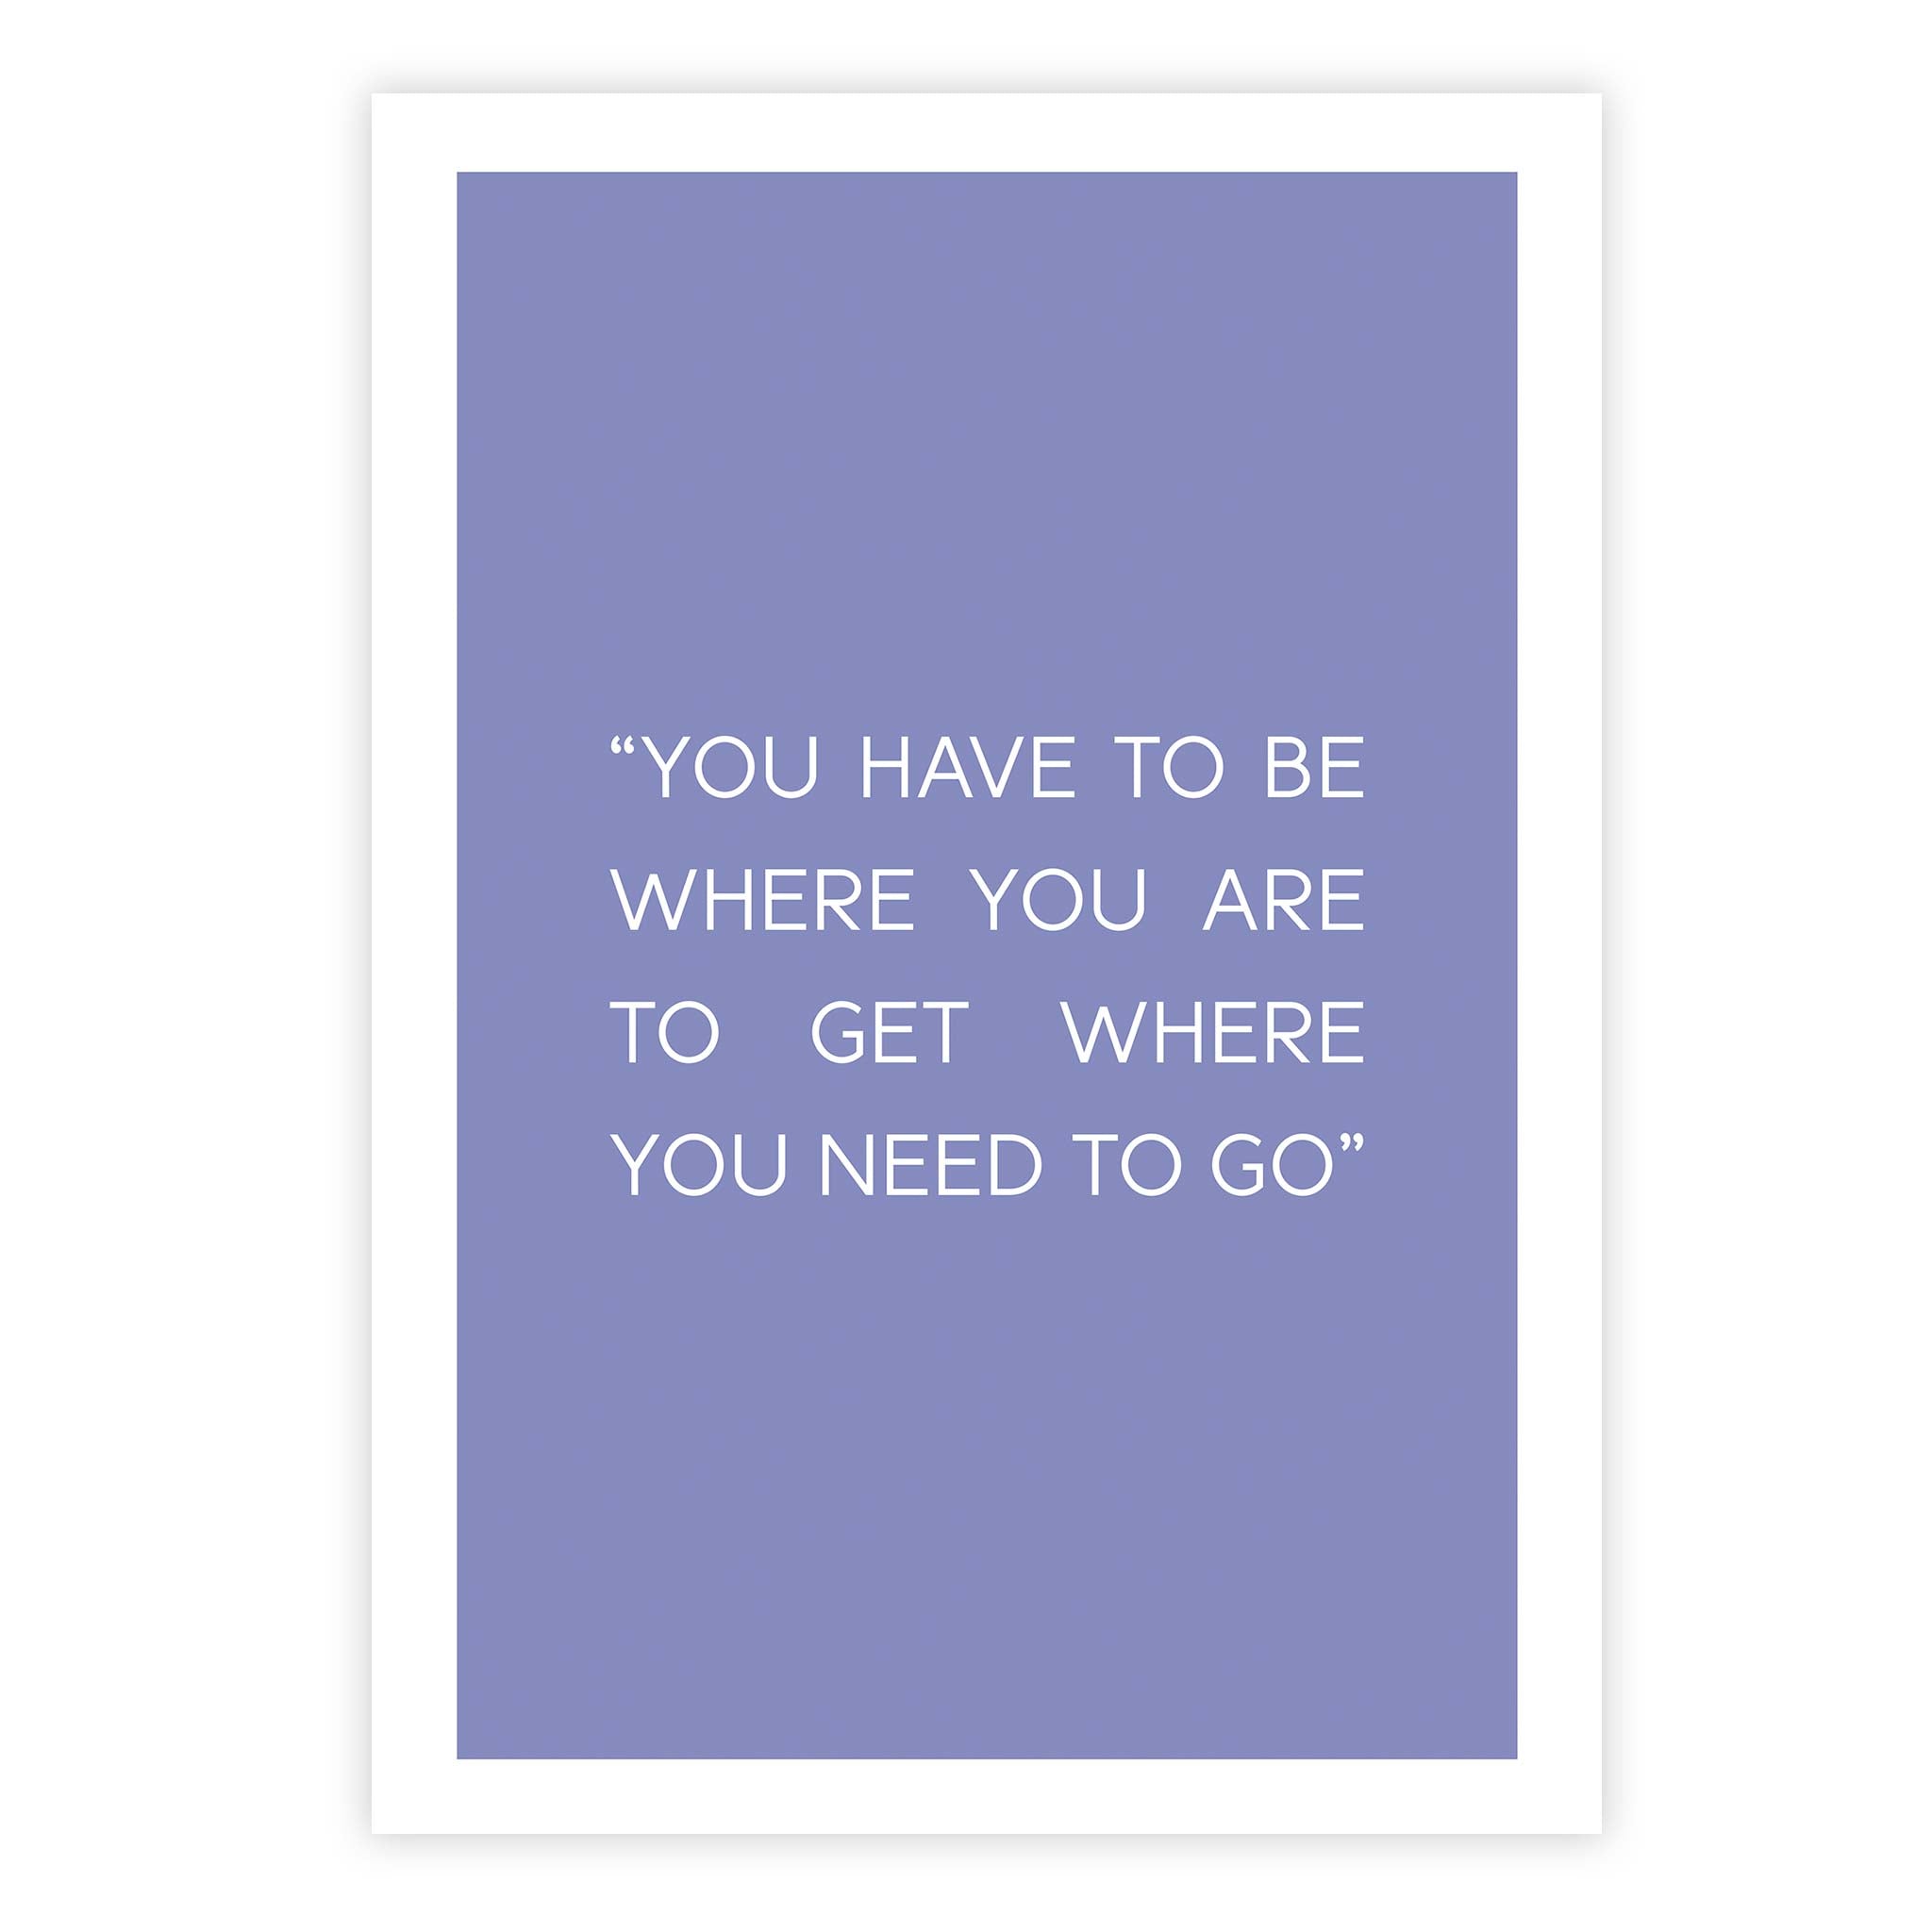 You have to be where you are to get where you need to go